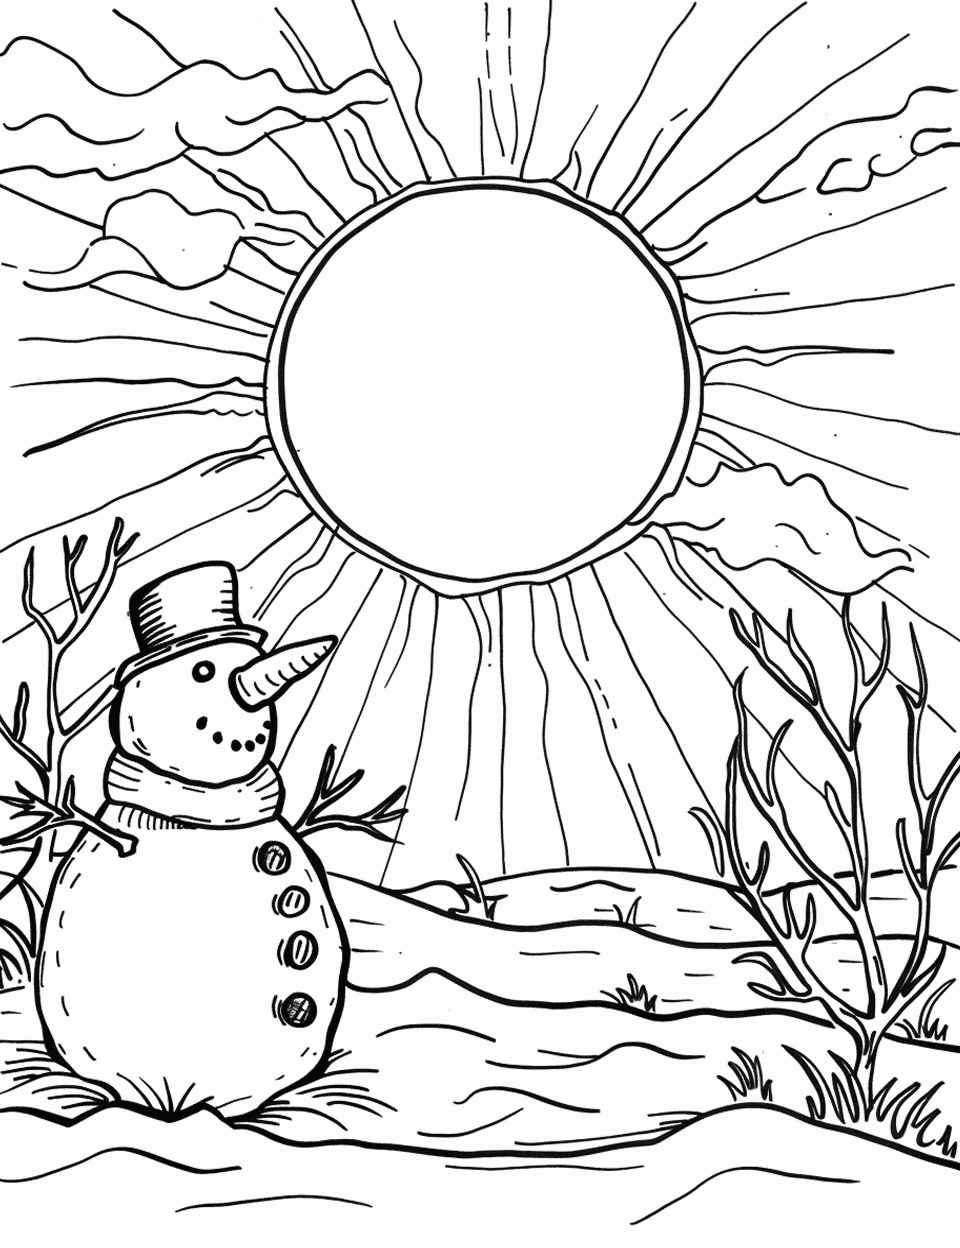 Winter Sun and a Snowman Coloring Page - A snowman standing in a field with the low winter sun in the background.